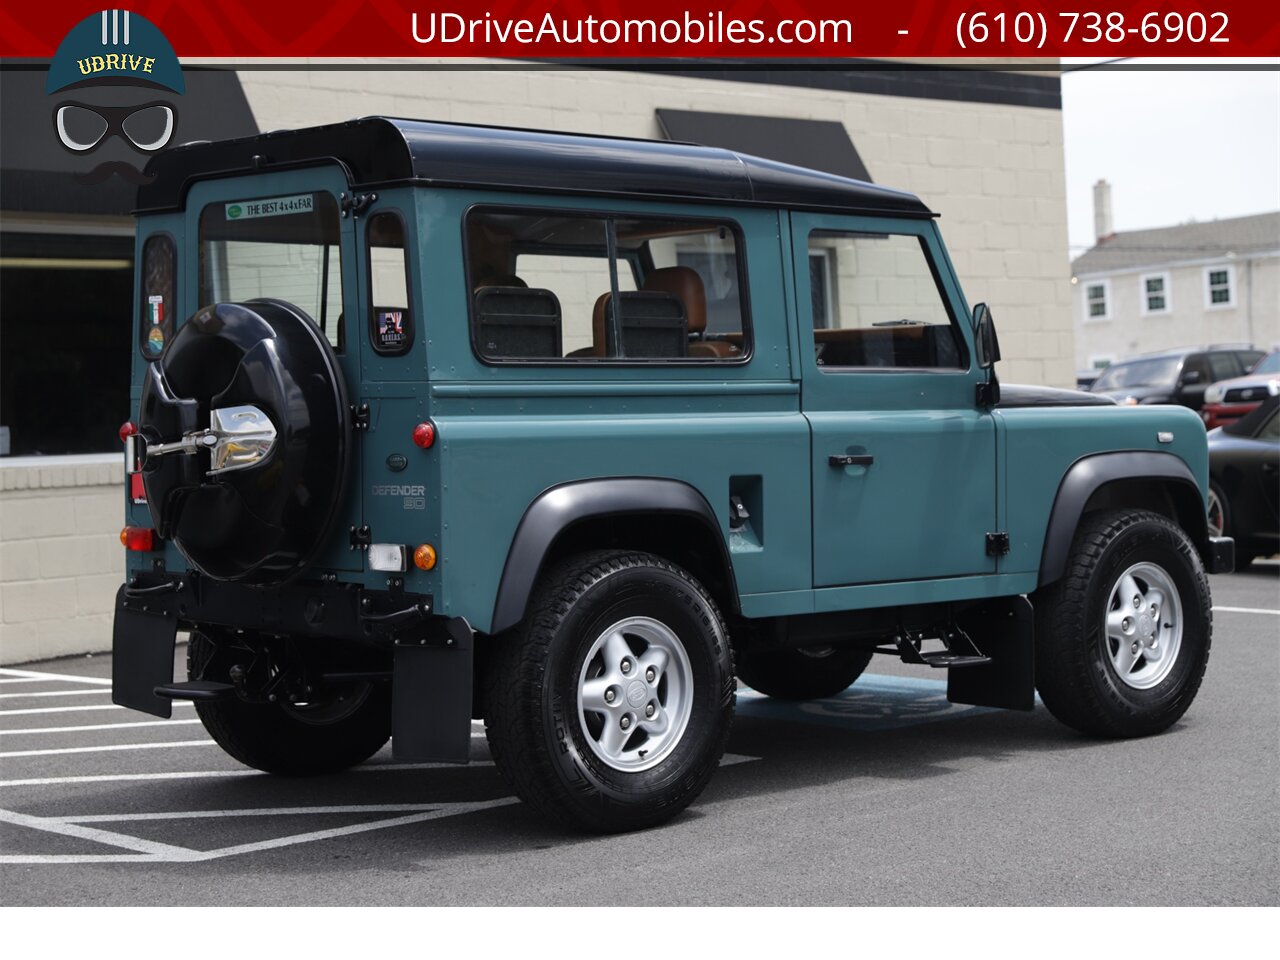 1986 Land Rover Defender 90 D90 4.0L V8 5 Speed Manual New Interior  $25k Recent Engine Build - Photo 20 - West Chester, PA 19382